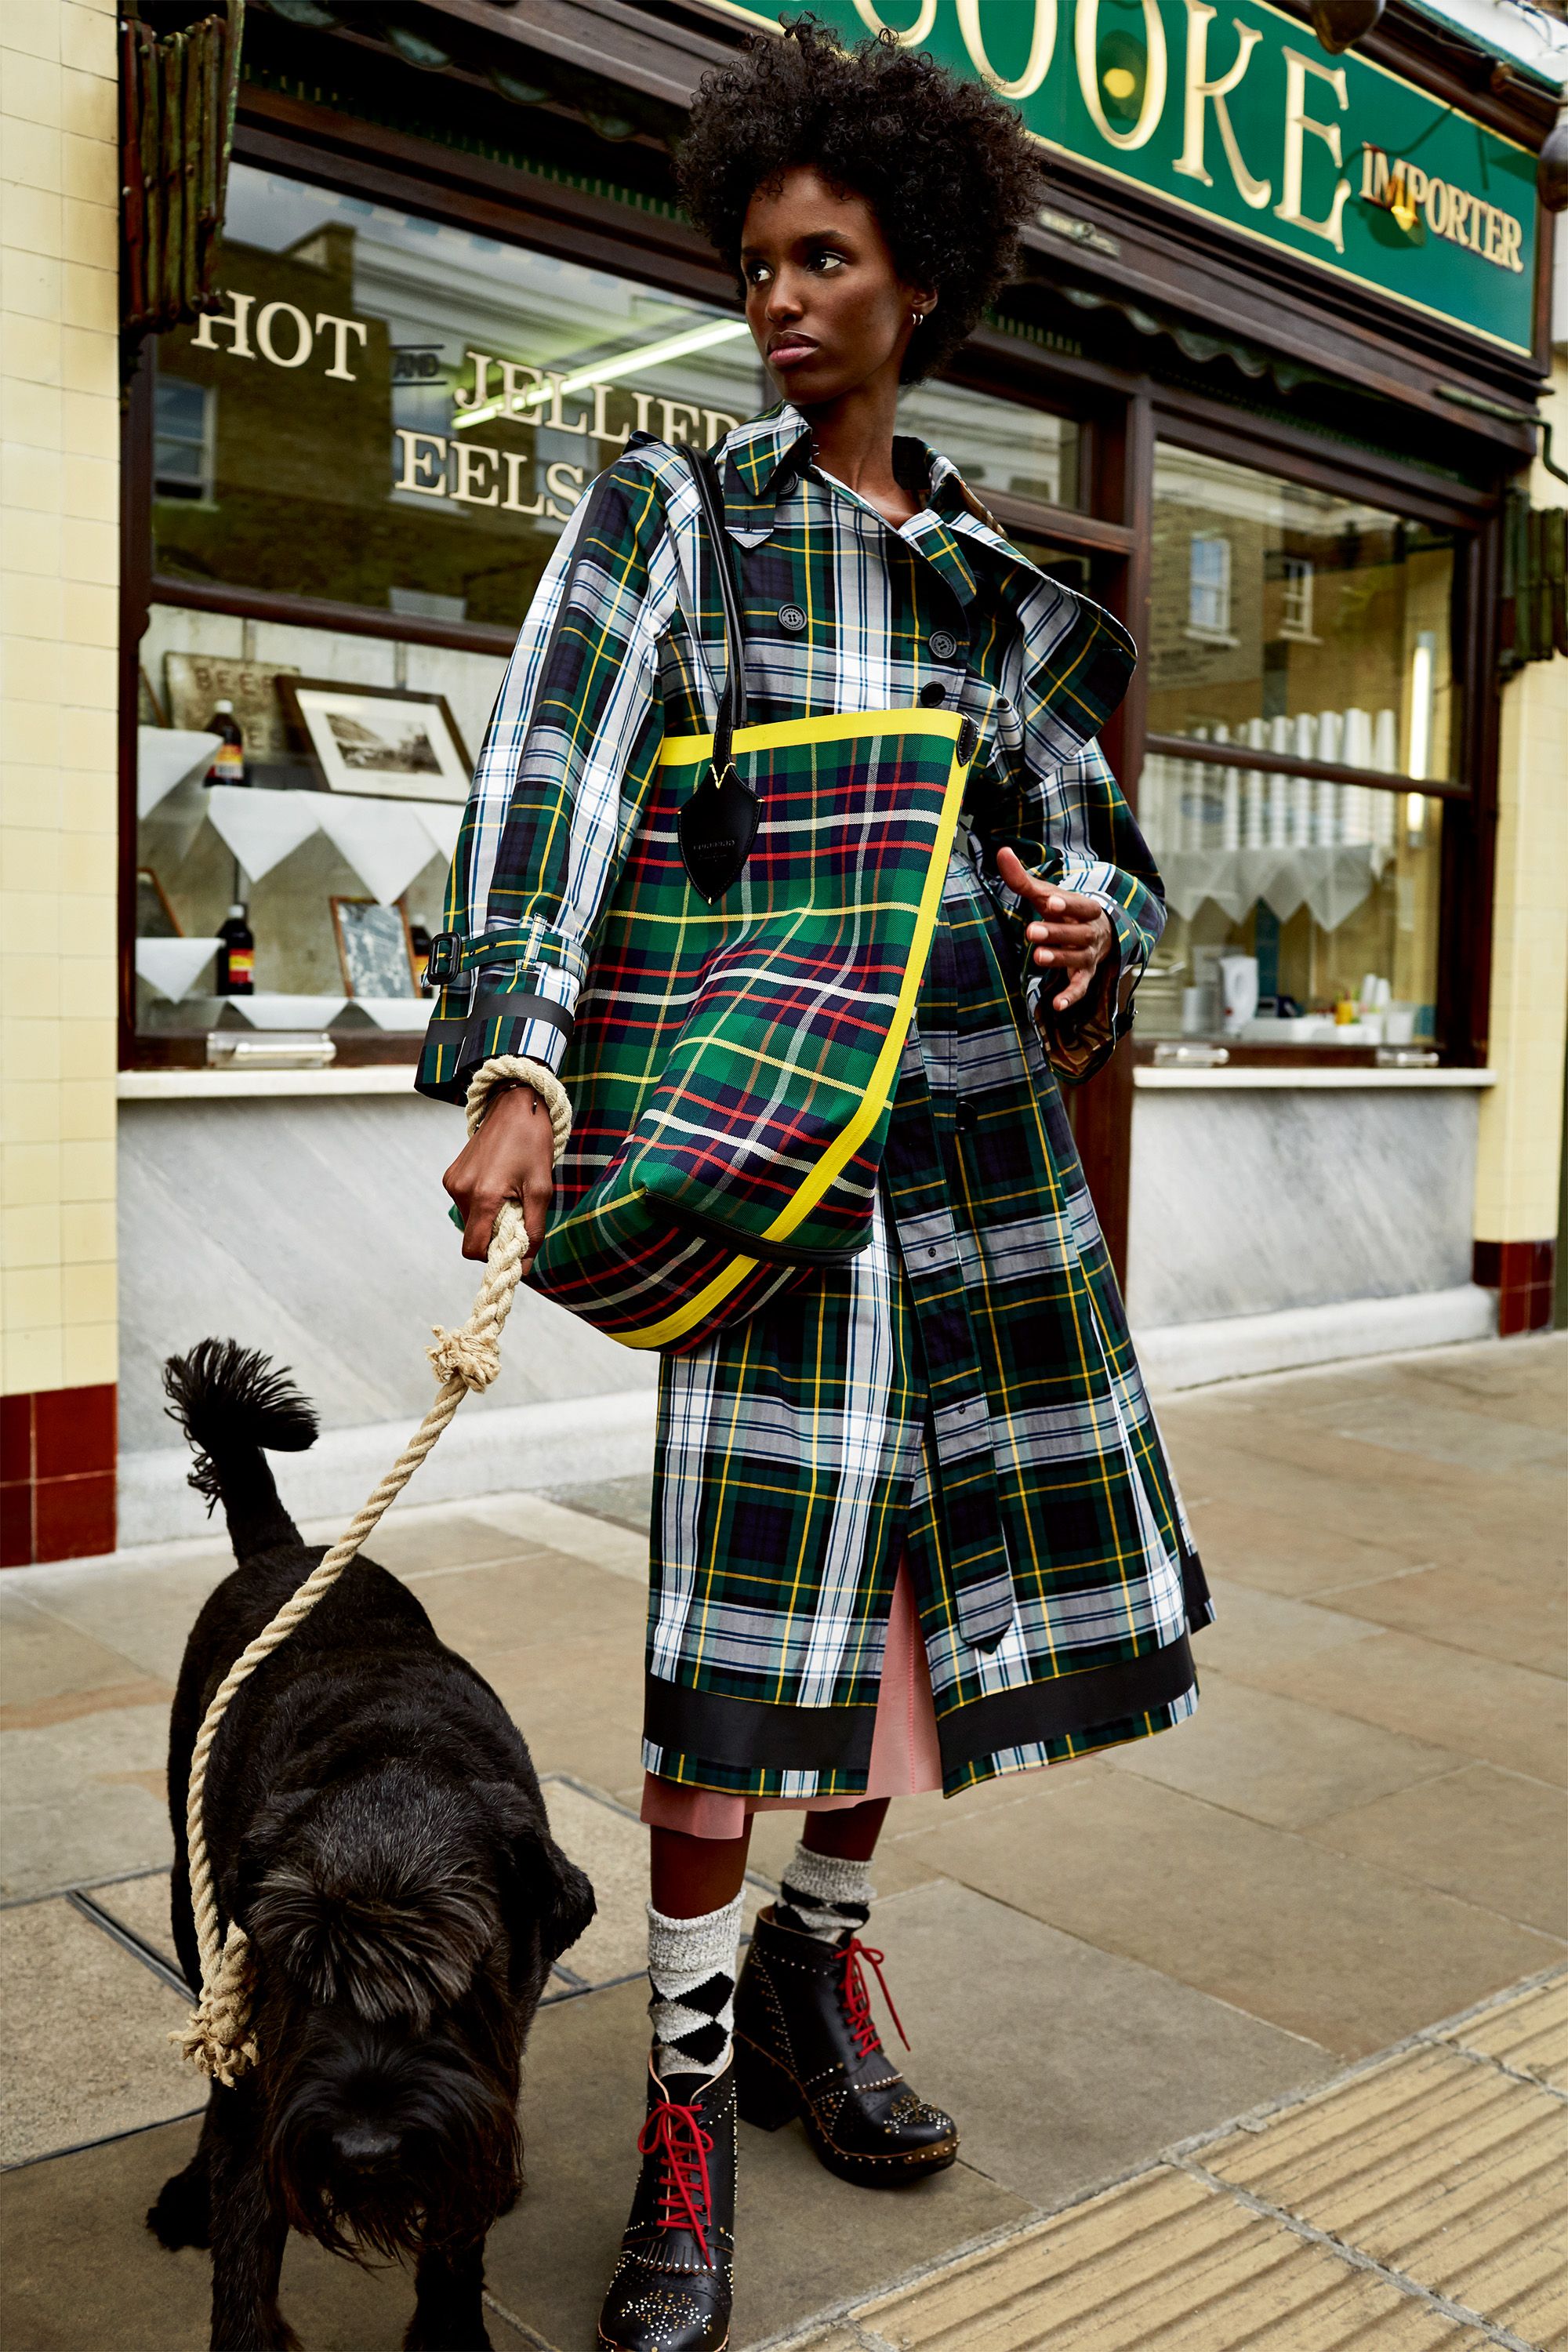 Burberry partners up with Vestiaire Collective on resale